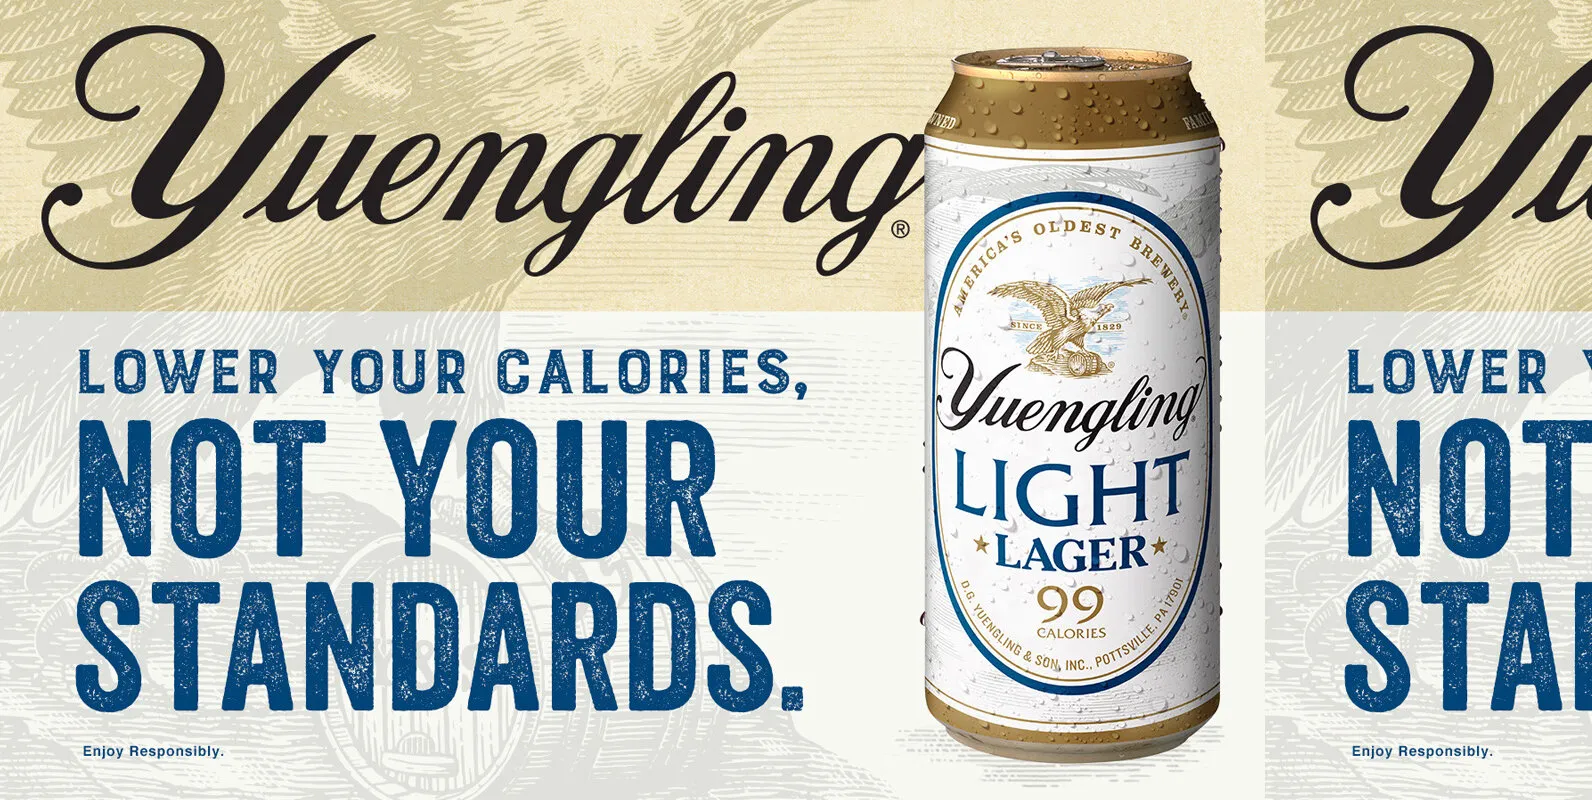 Yuengling Licenses Veneer for a National Marketing Campaign